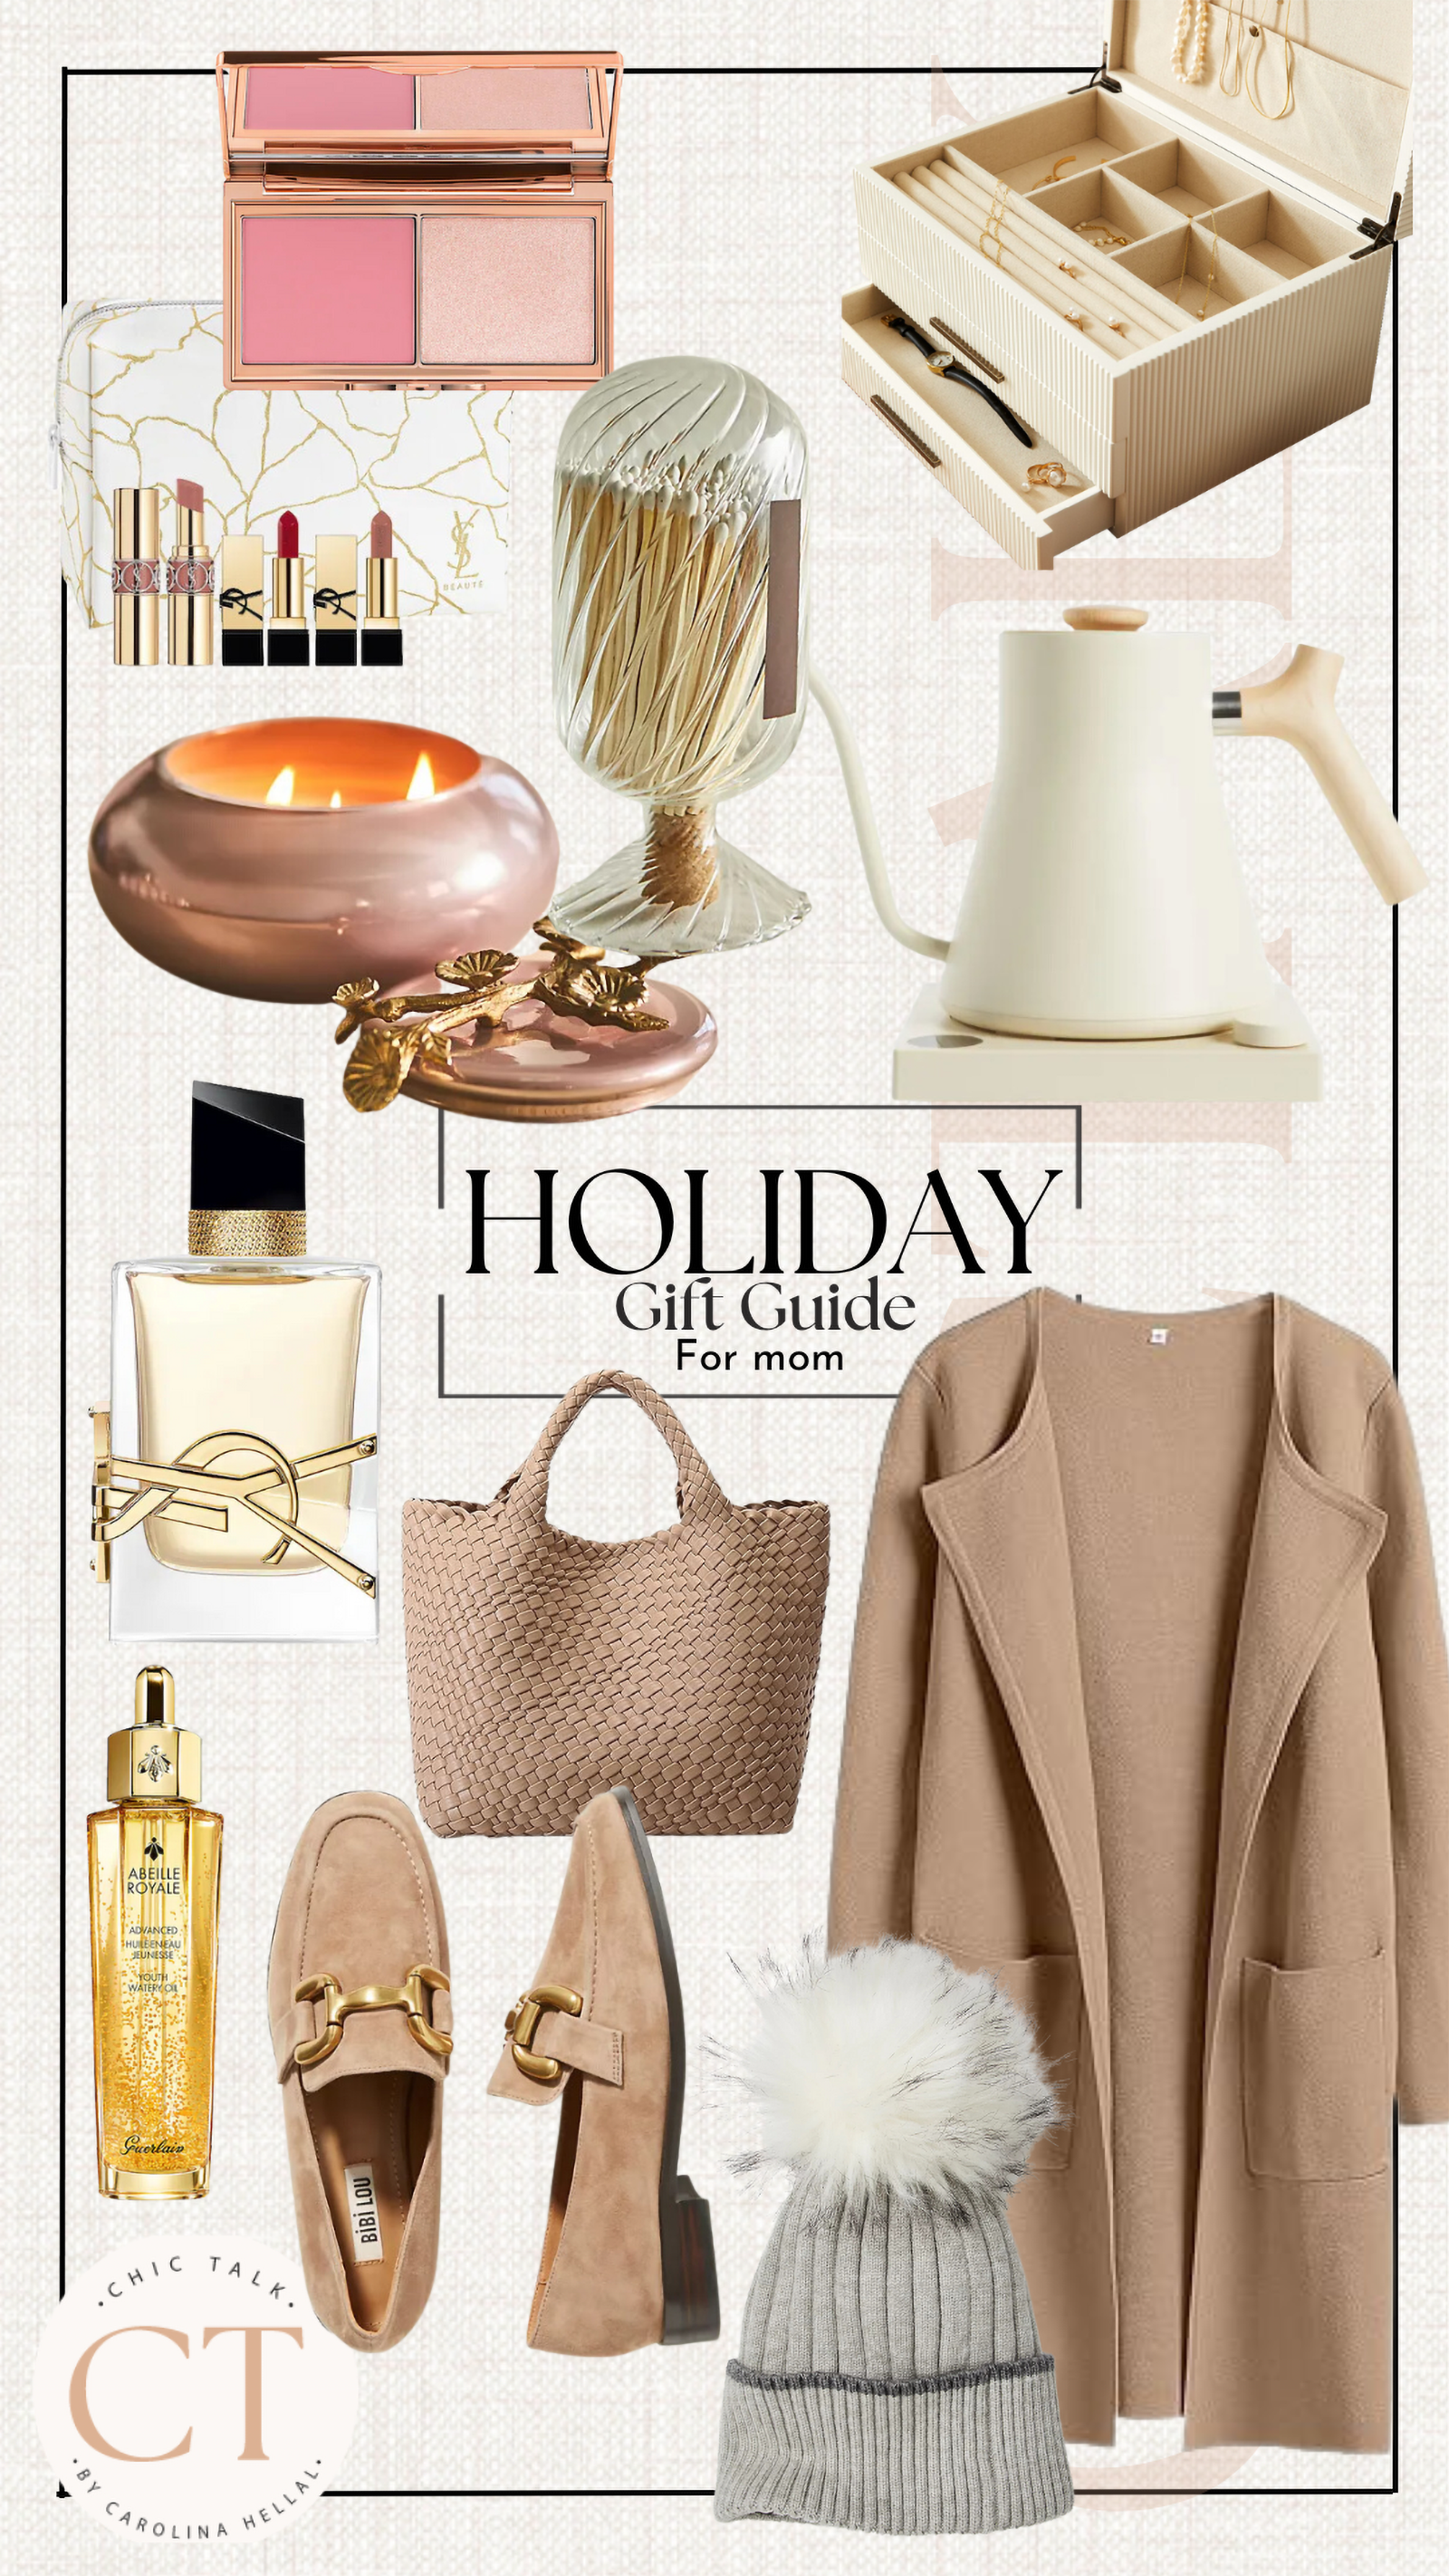 HOLIDAY GIFT GUIDE FOR MOM CHIC TALK